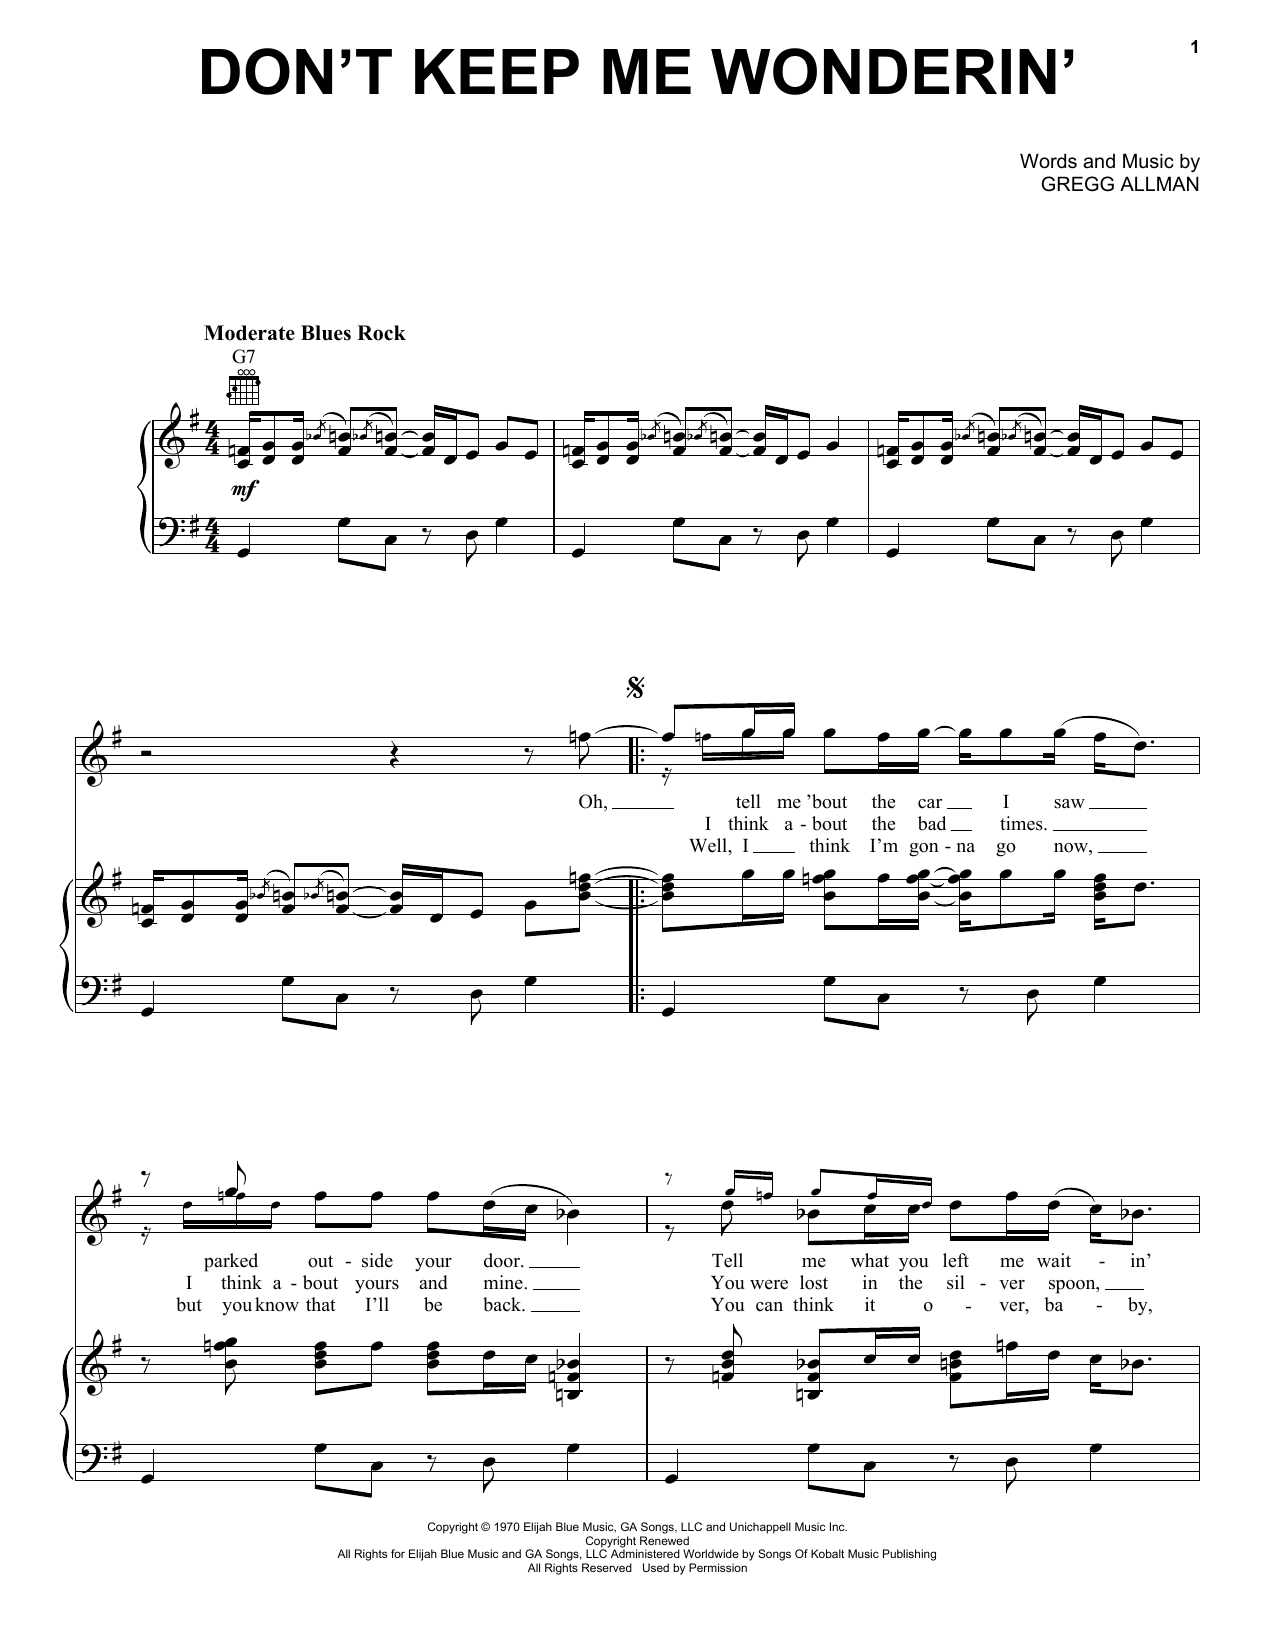 Download The Allman Brothers Band Don't Keep Me Wonderin' Sheet Music